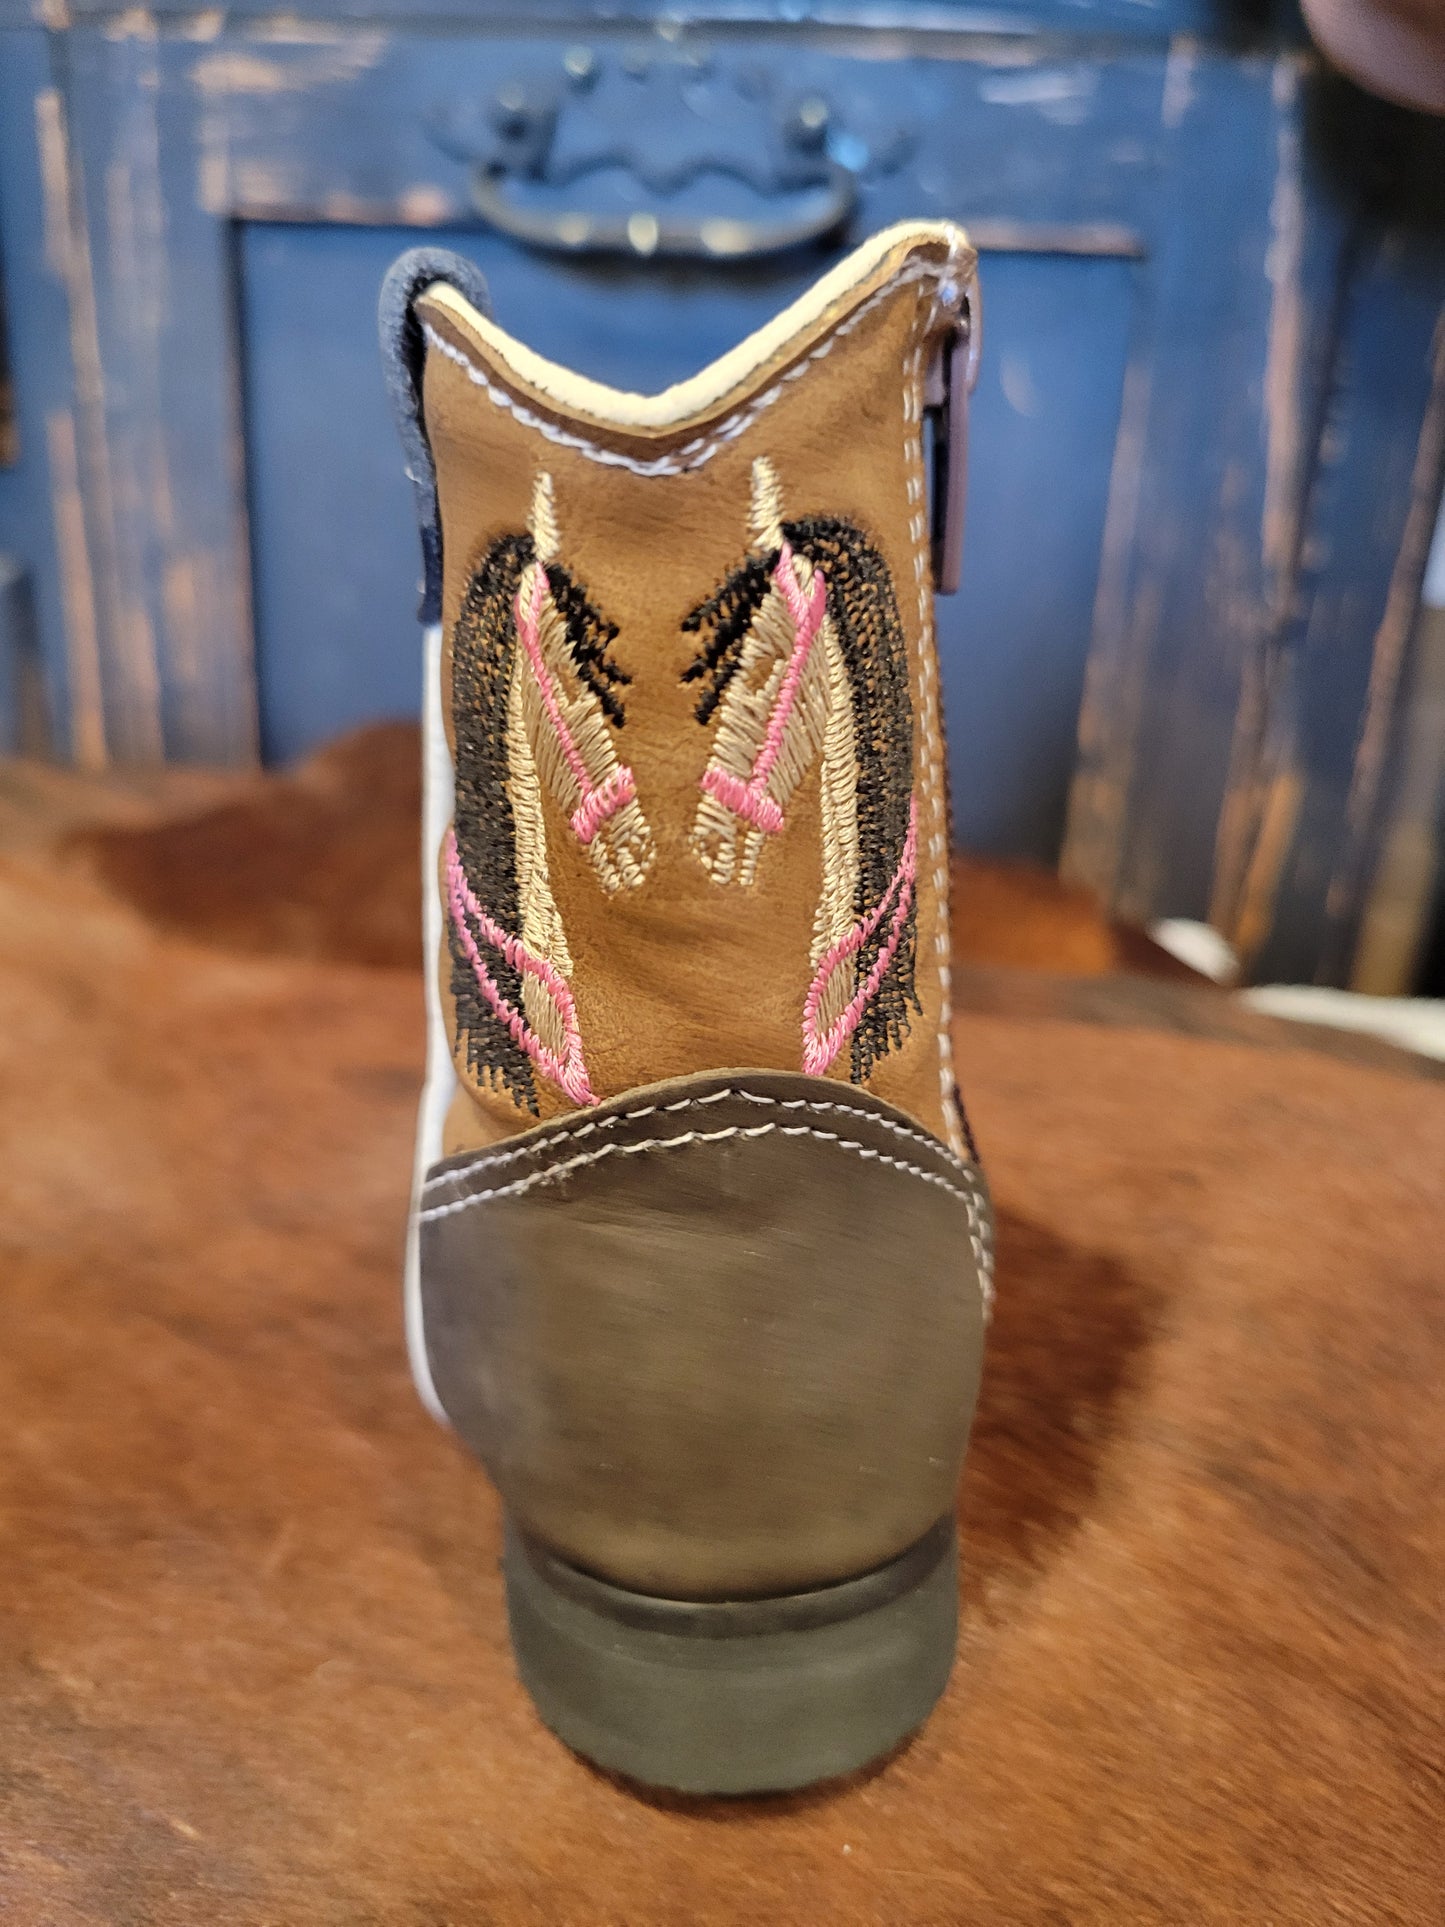 Cowgirl Square Toe Boots